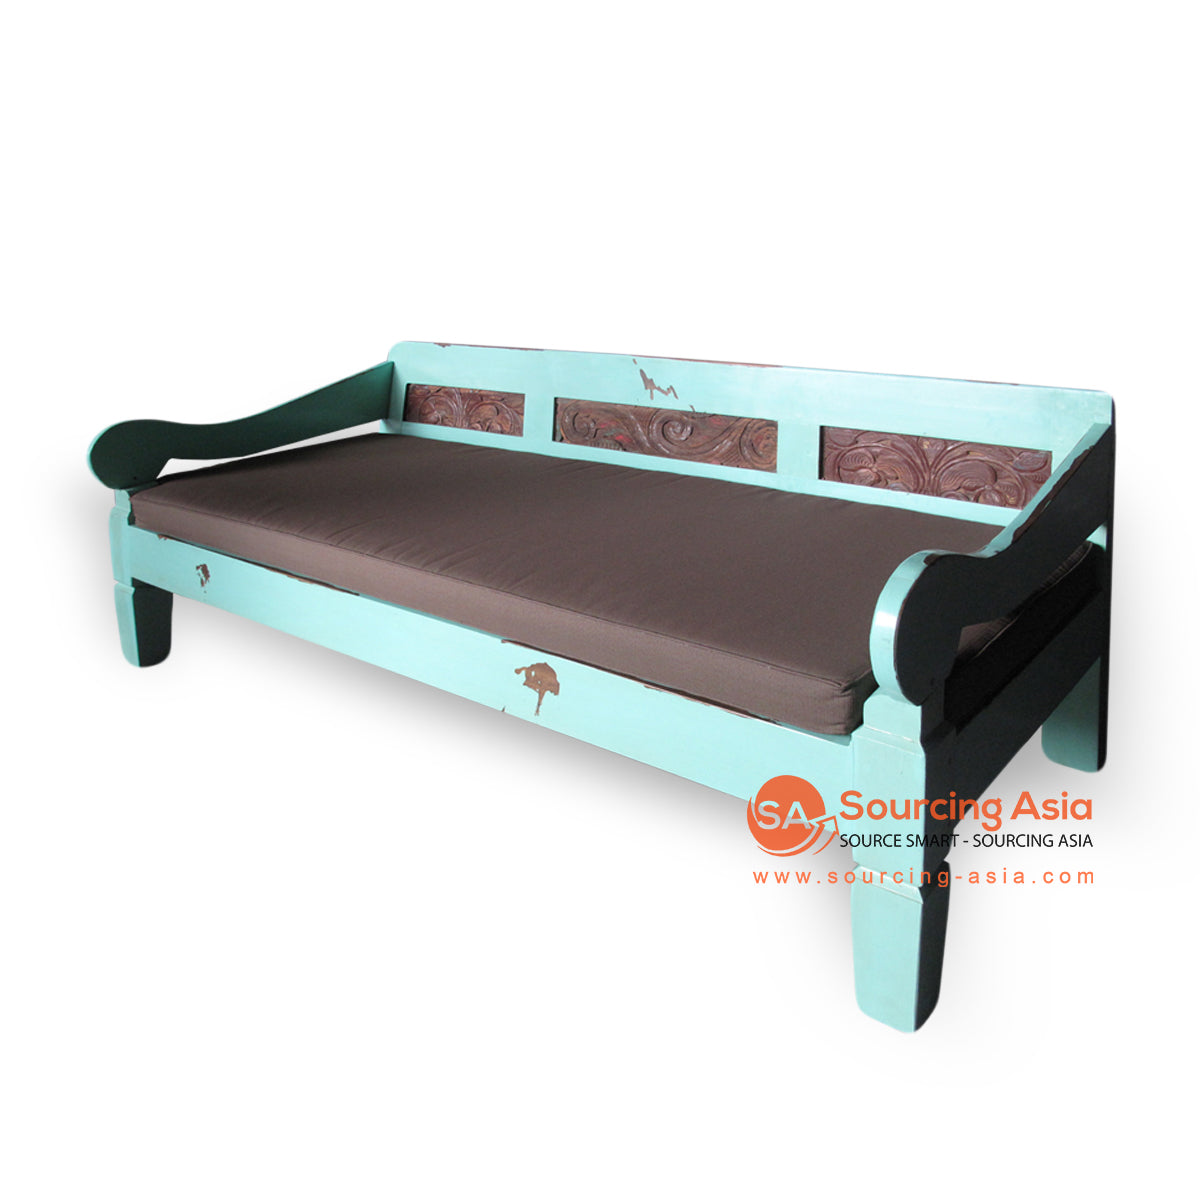 AYA001-SP4 ANTIQUE GREEN RECYCLED WOOD CARVED DAYBED WITH OLD CARVED PANEL (PRICE WITHOUT CUSHION)